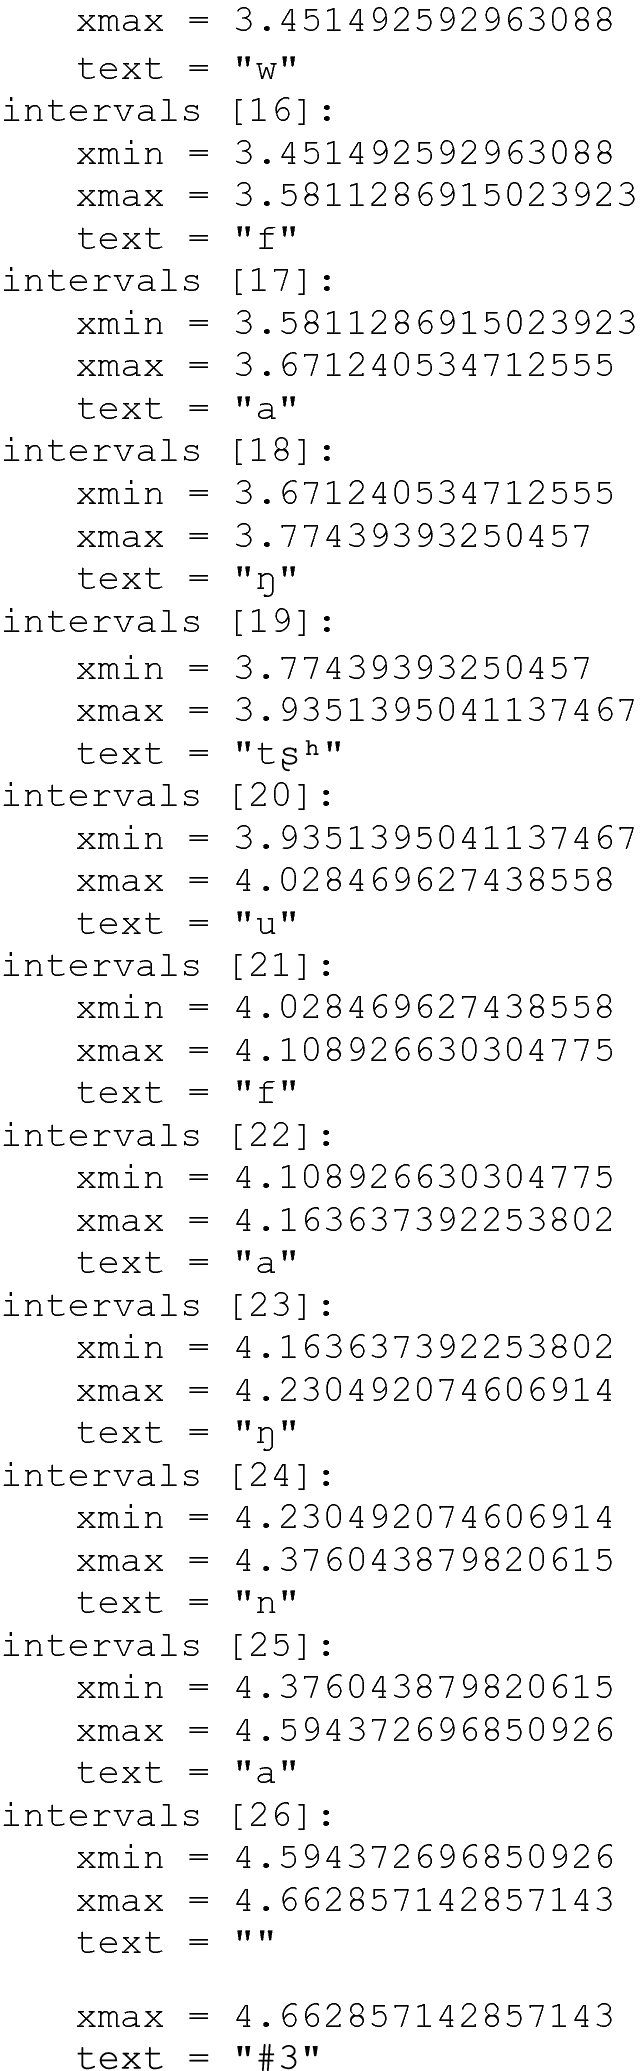 A set of program codes defines several intervals with values of x min, x max, and text as single alphabets.